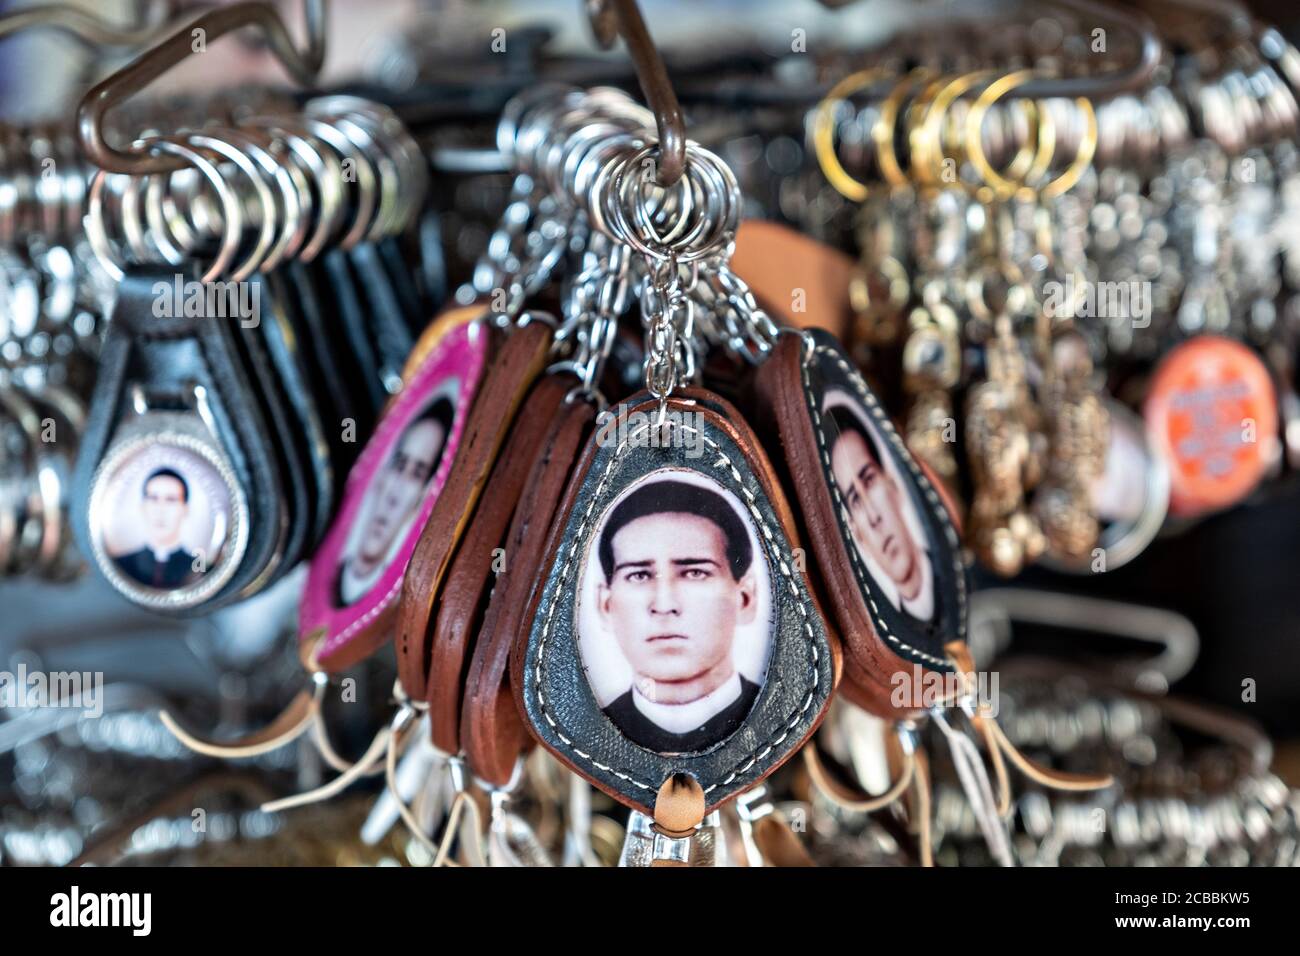 Souvenirs of Saint Toribio Romo at the Sanctuary Santa Ana de Guadalupe in Jalisco State, Mexico. Father Toribio was a Mexican Catholic priest and martyr who was killed during the anti-clerical persecutions of the Cristero War. Stock Photo